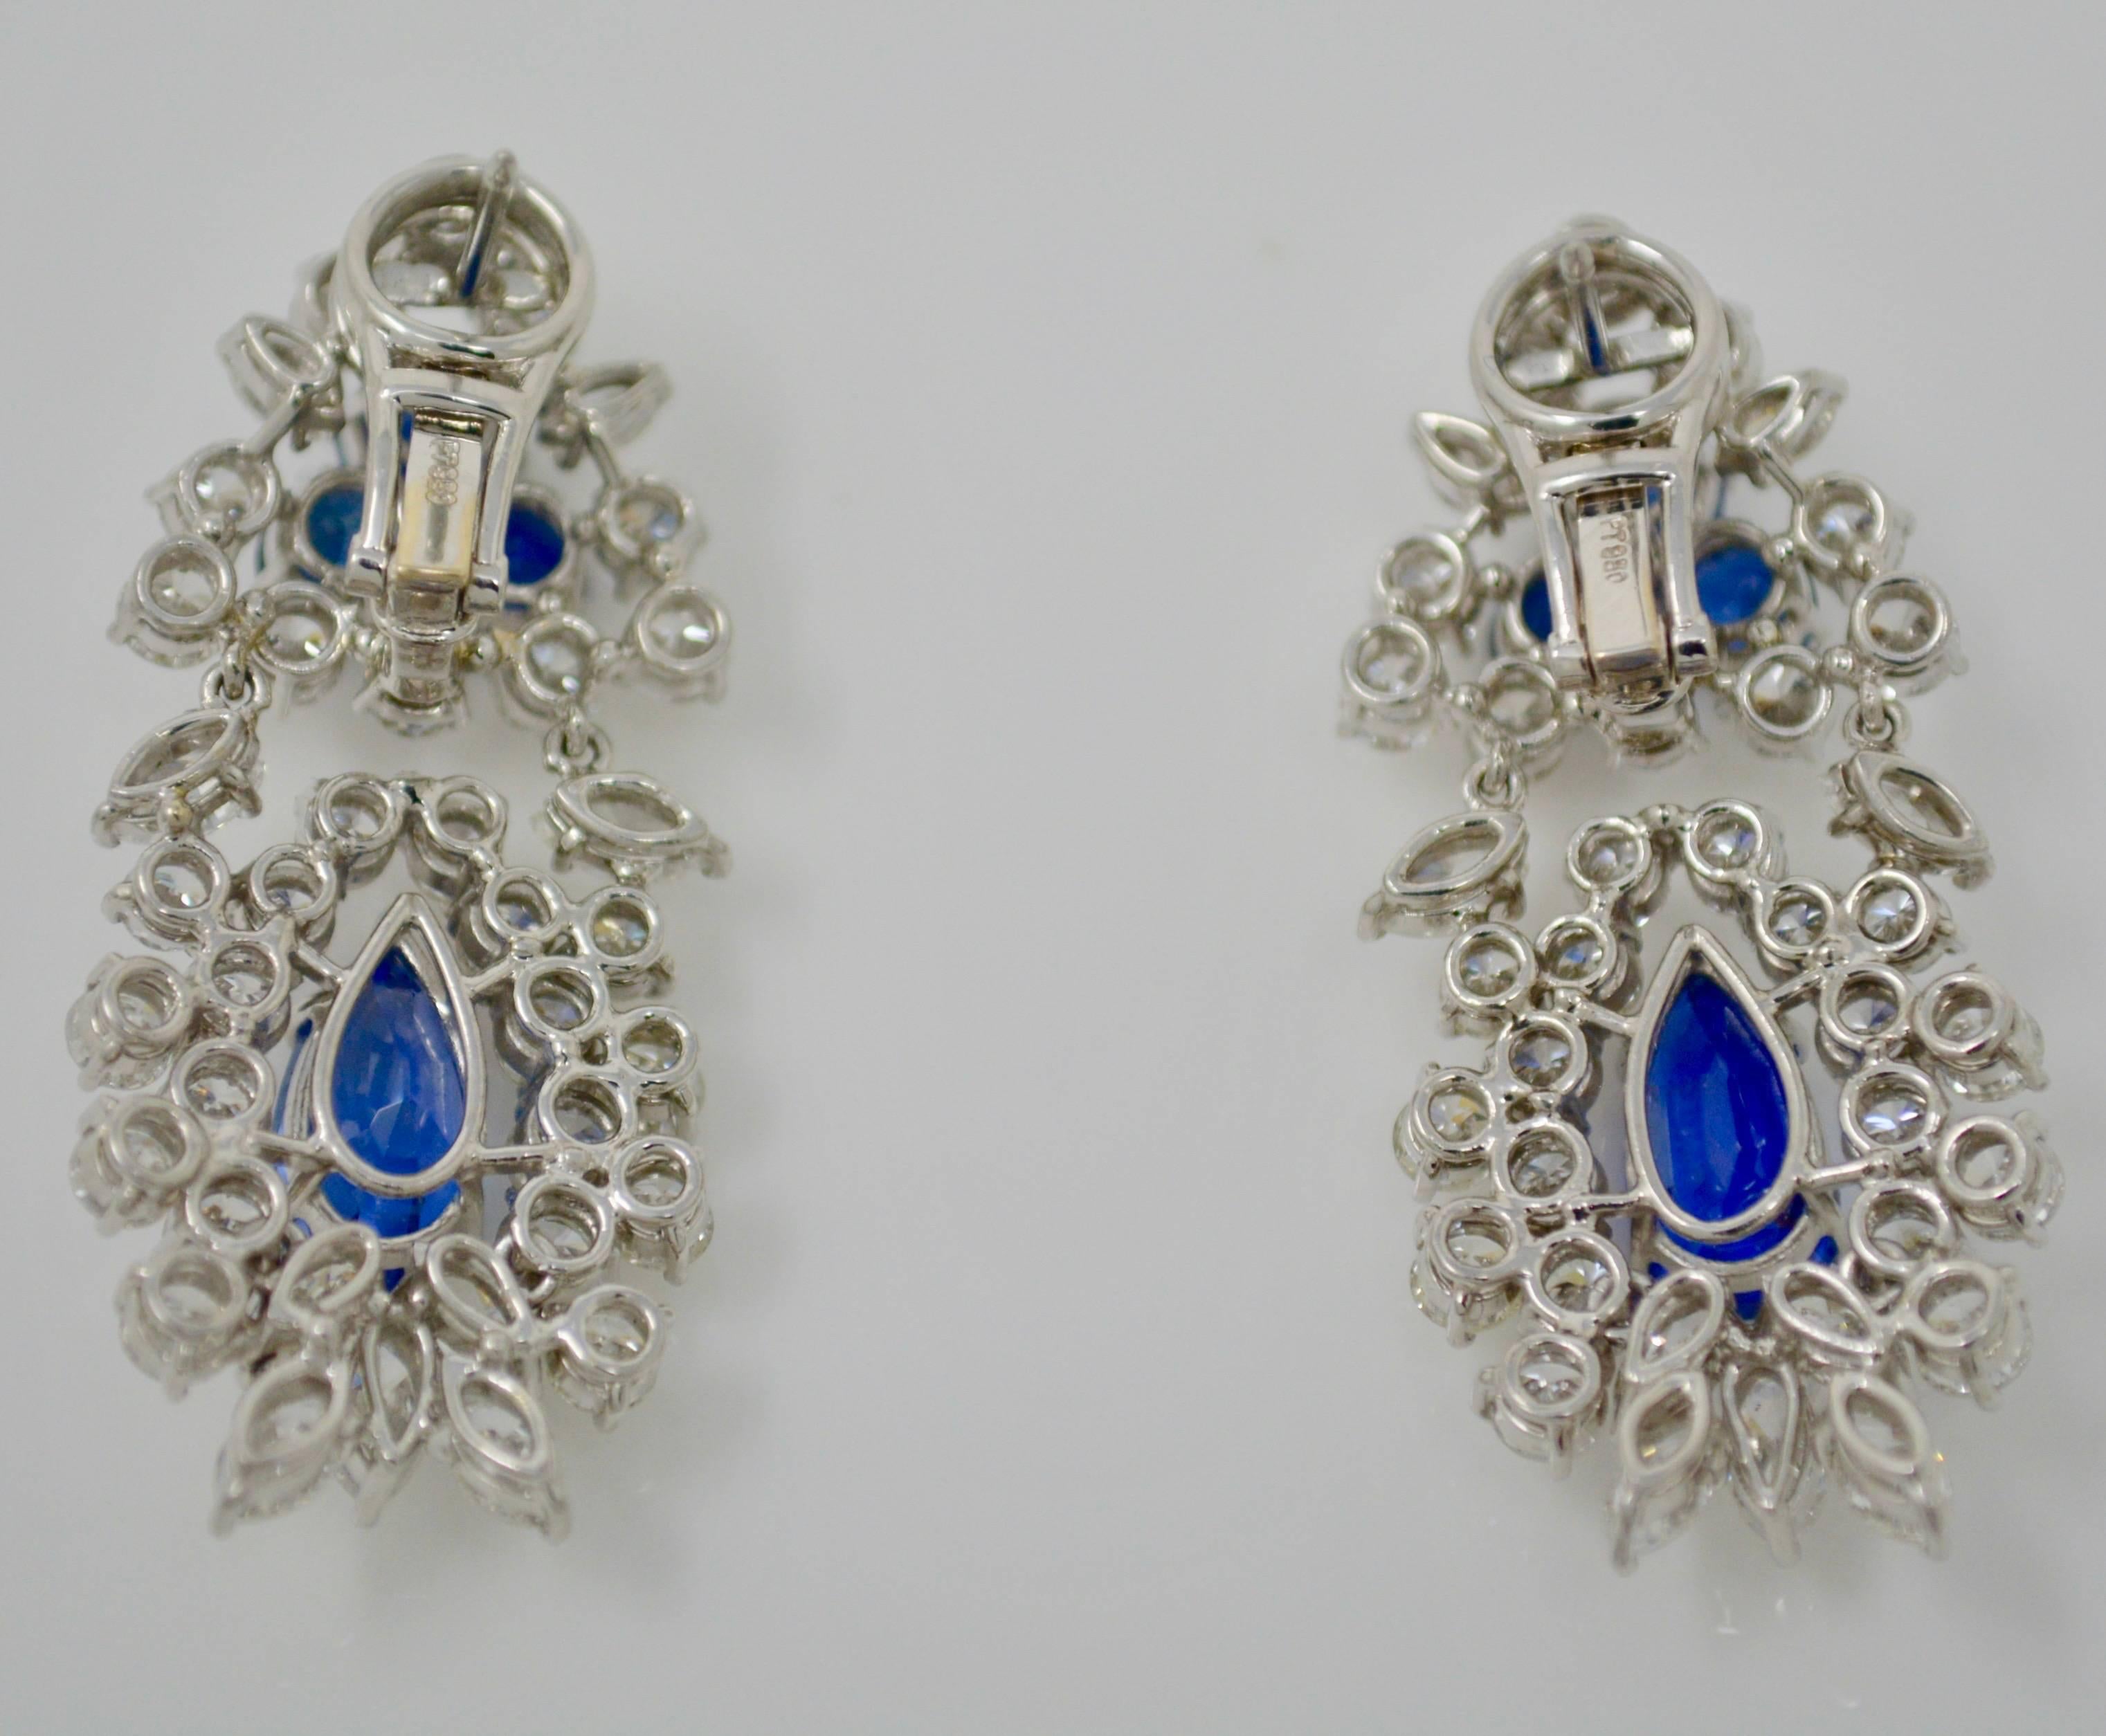 These lovely and detailed earrings are feminine, elegant, classy and wearable . They are made of platinum and features two pear shape blue sapphire weighing 2.98 CTS and 2.73 CTS and two round sapphire on top with a surround of round brilliant cut